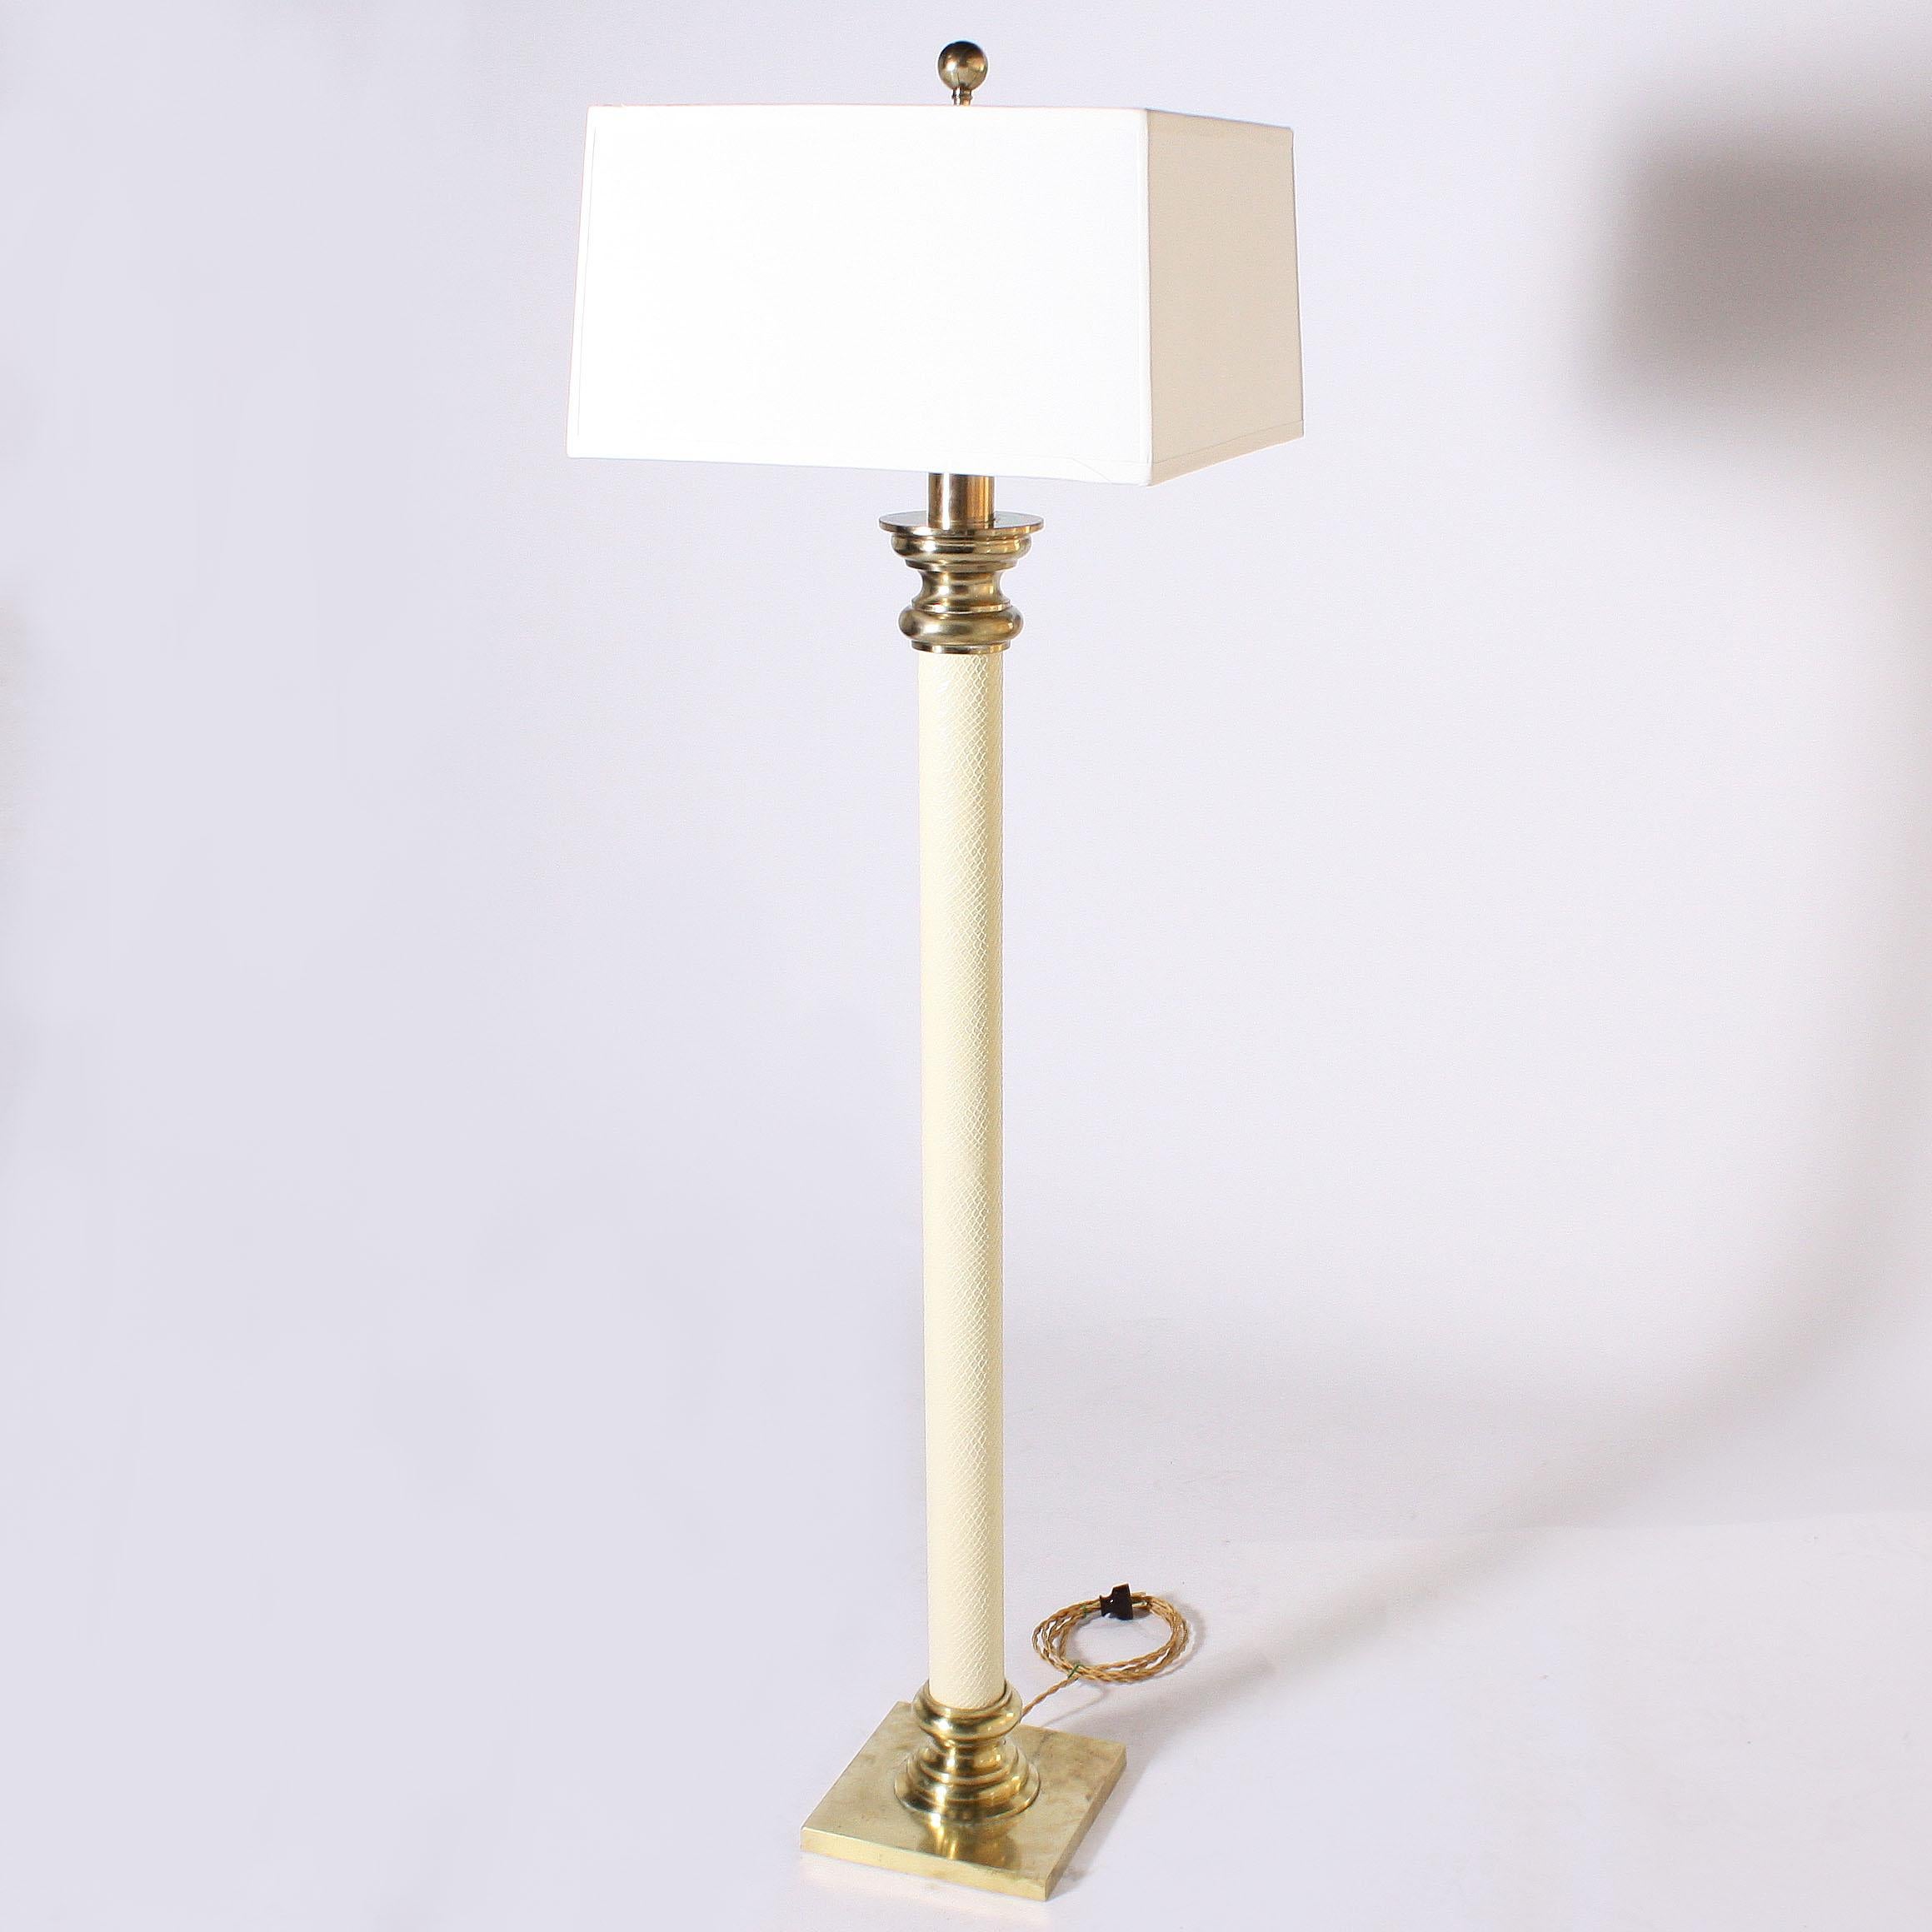 Ivory faux leather floor lamp with brass details, circa 1970.